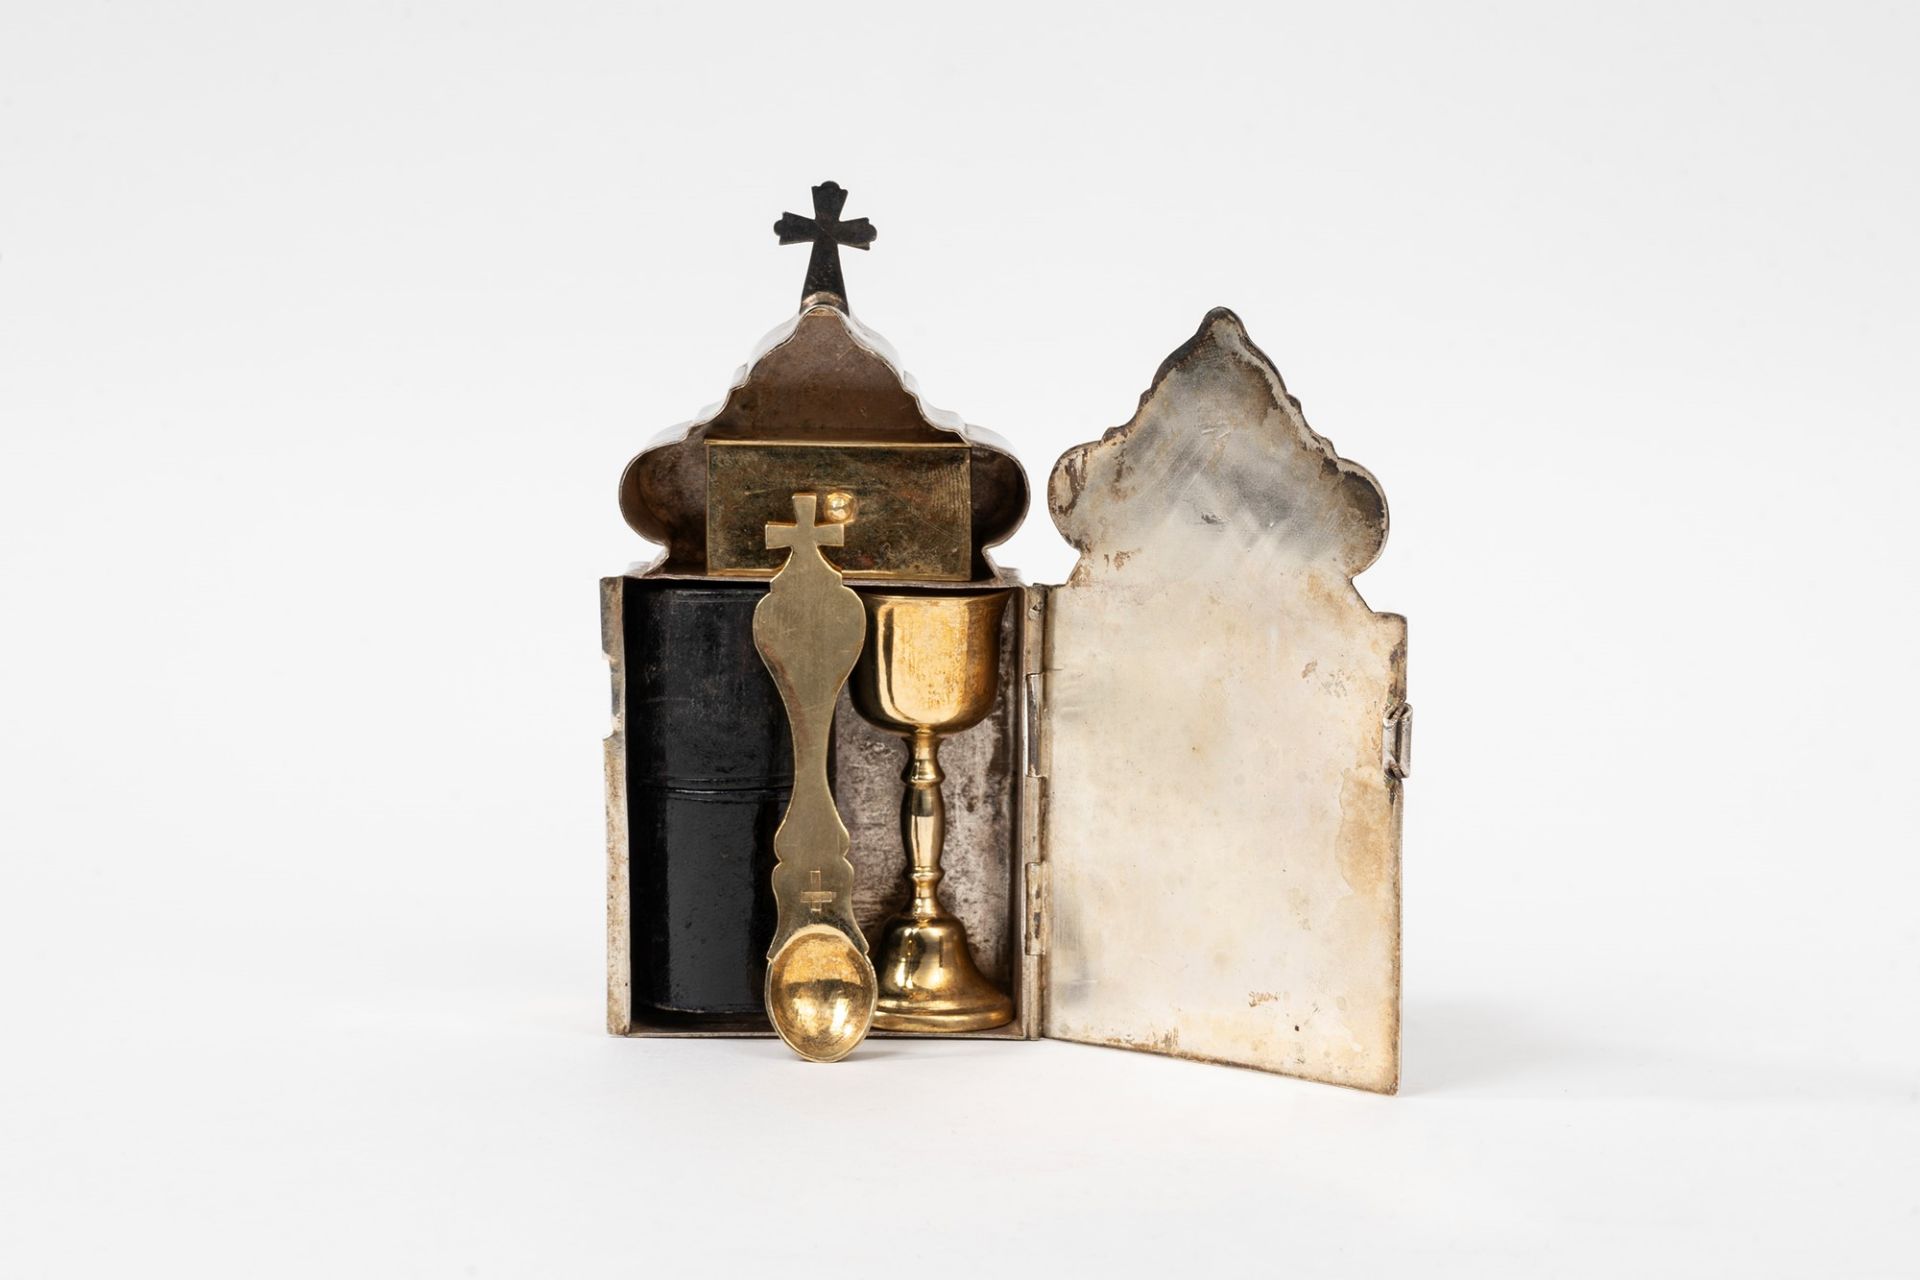 Portable mass box containing Eucharistic instruments, Russia, 19th century - Image 2 of 6